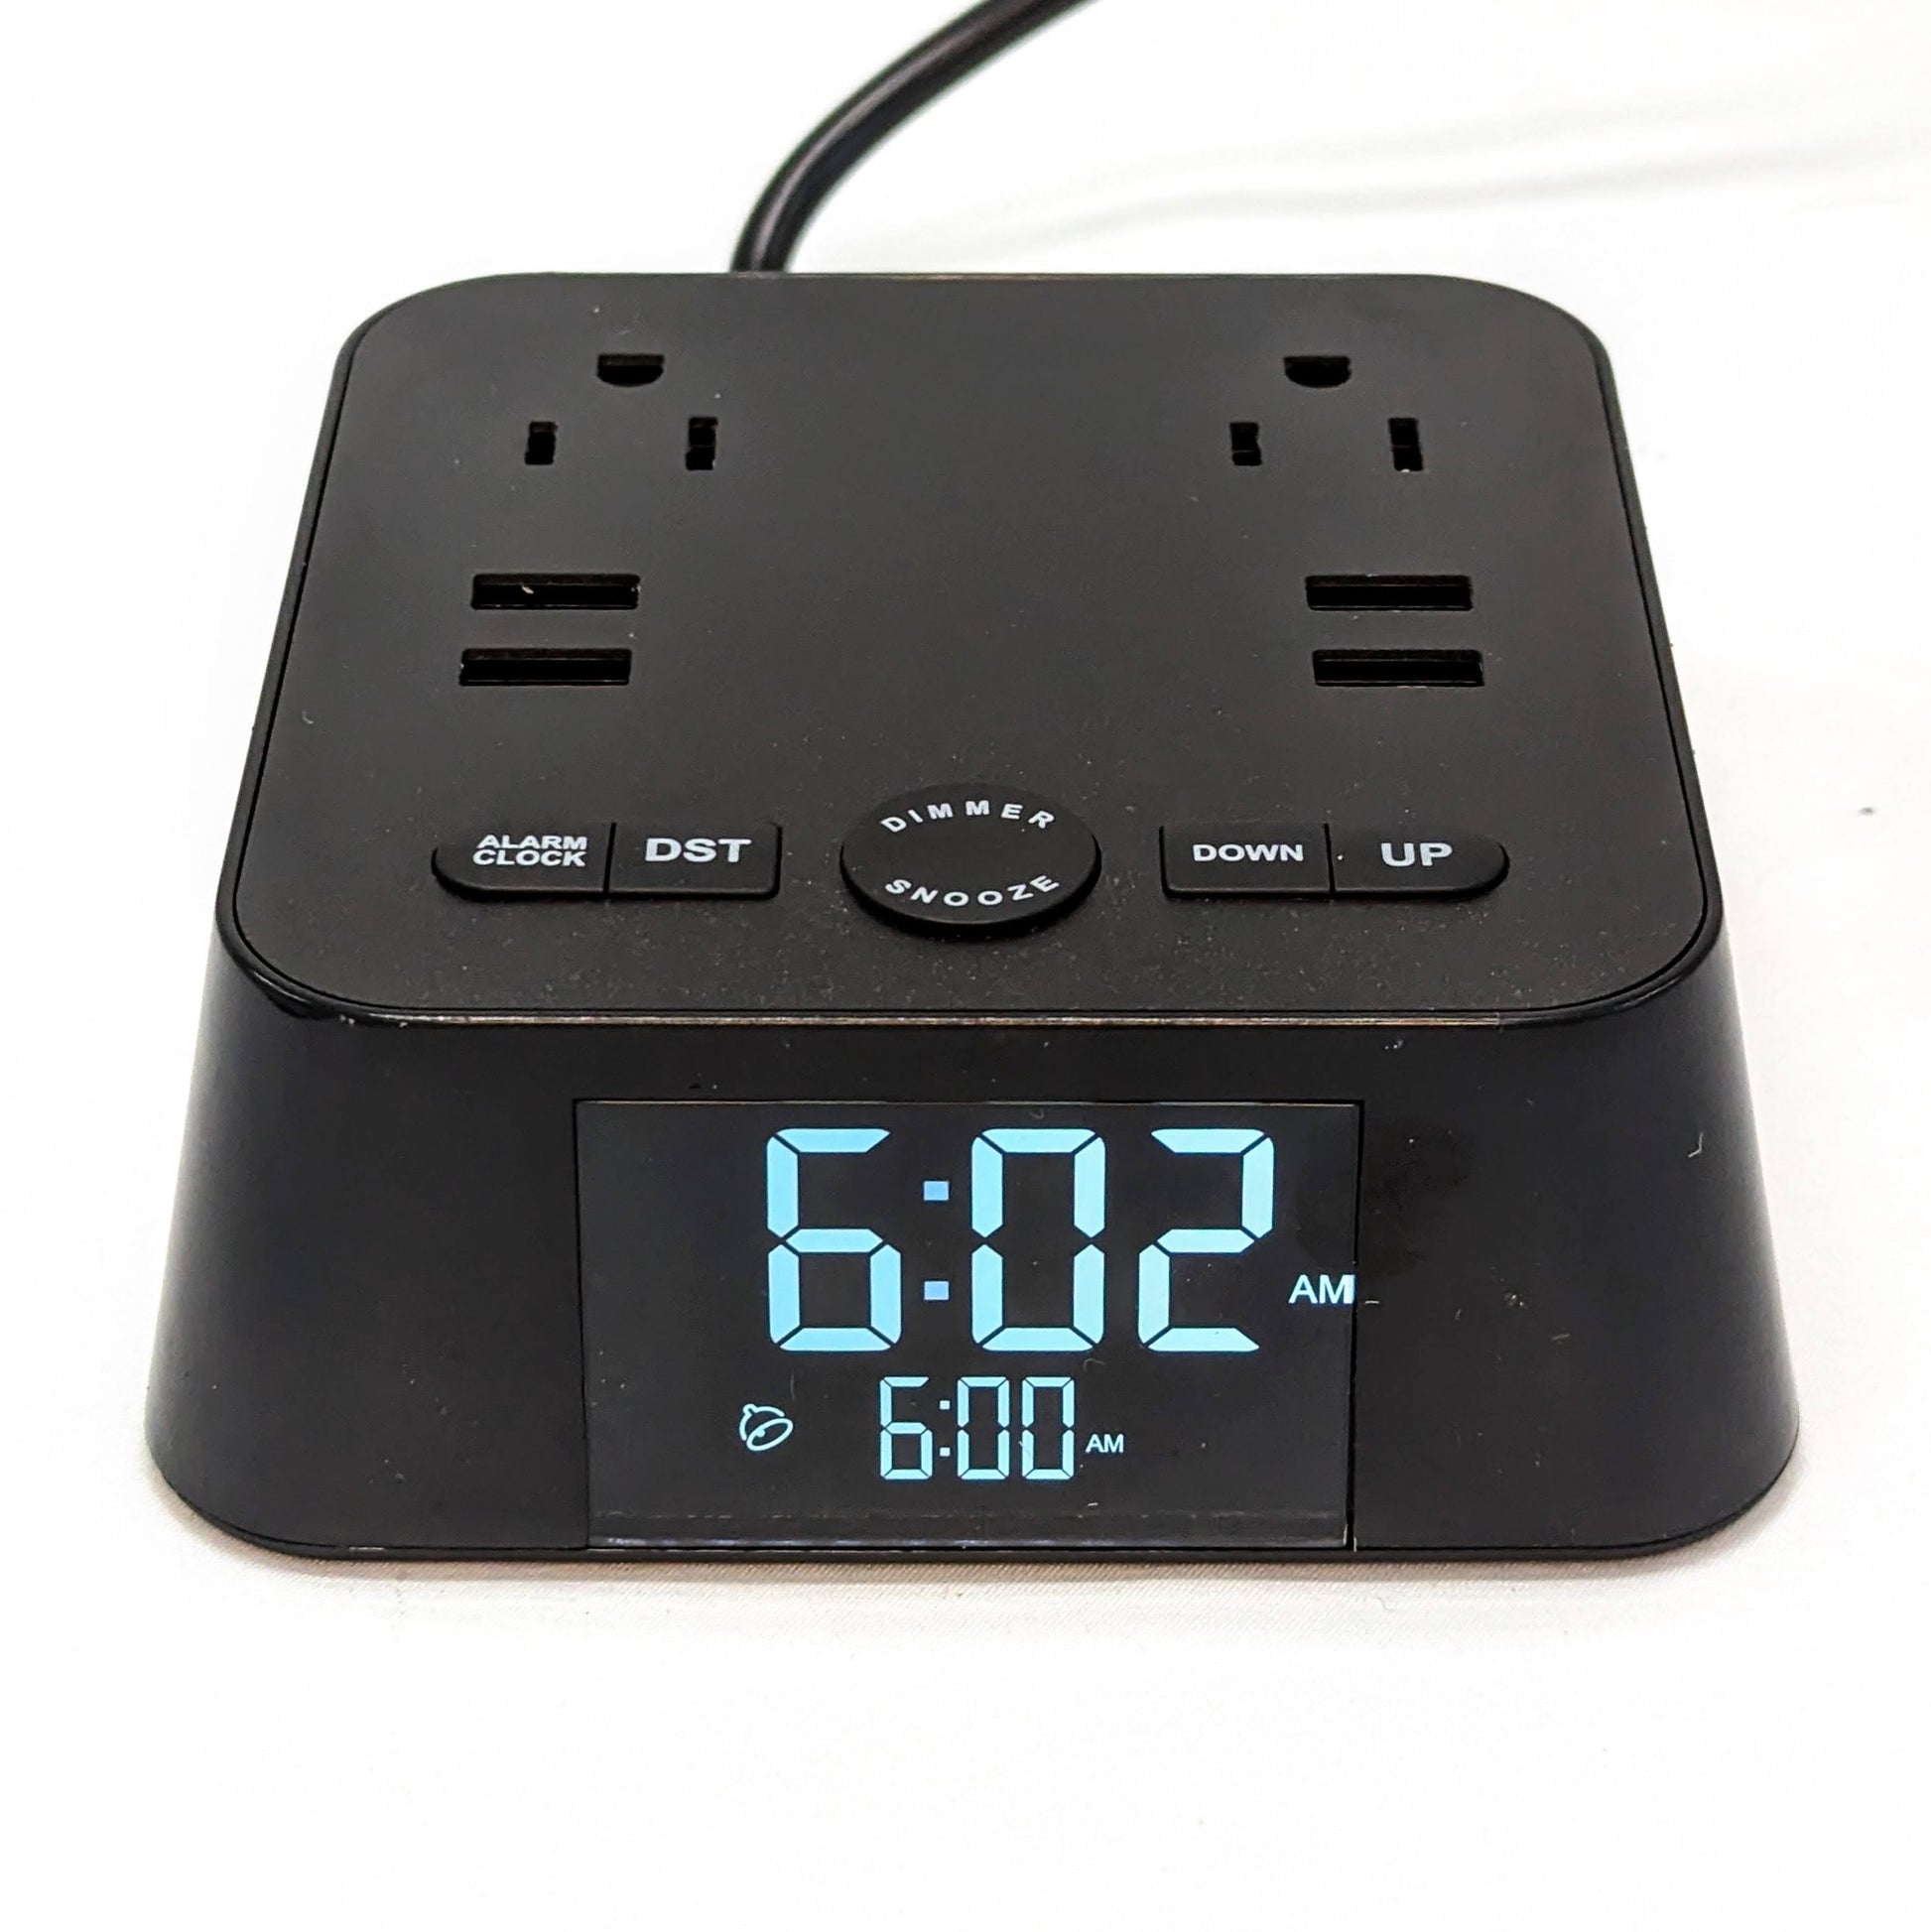 New! Power Hub Ultra with Alarm Clock - Charge up to 6 devices using 1 wall outlet - Great Useful Stuff - No cover